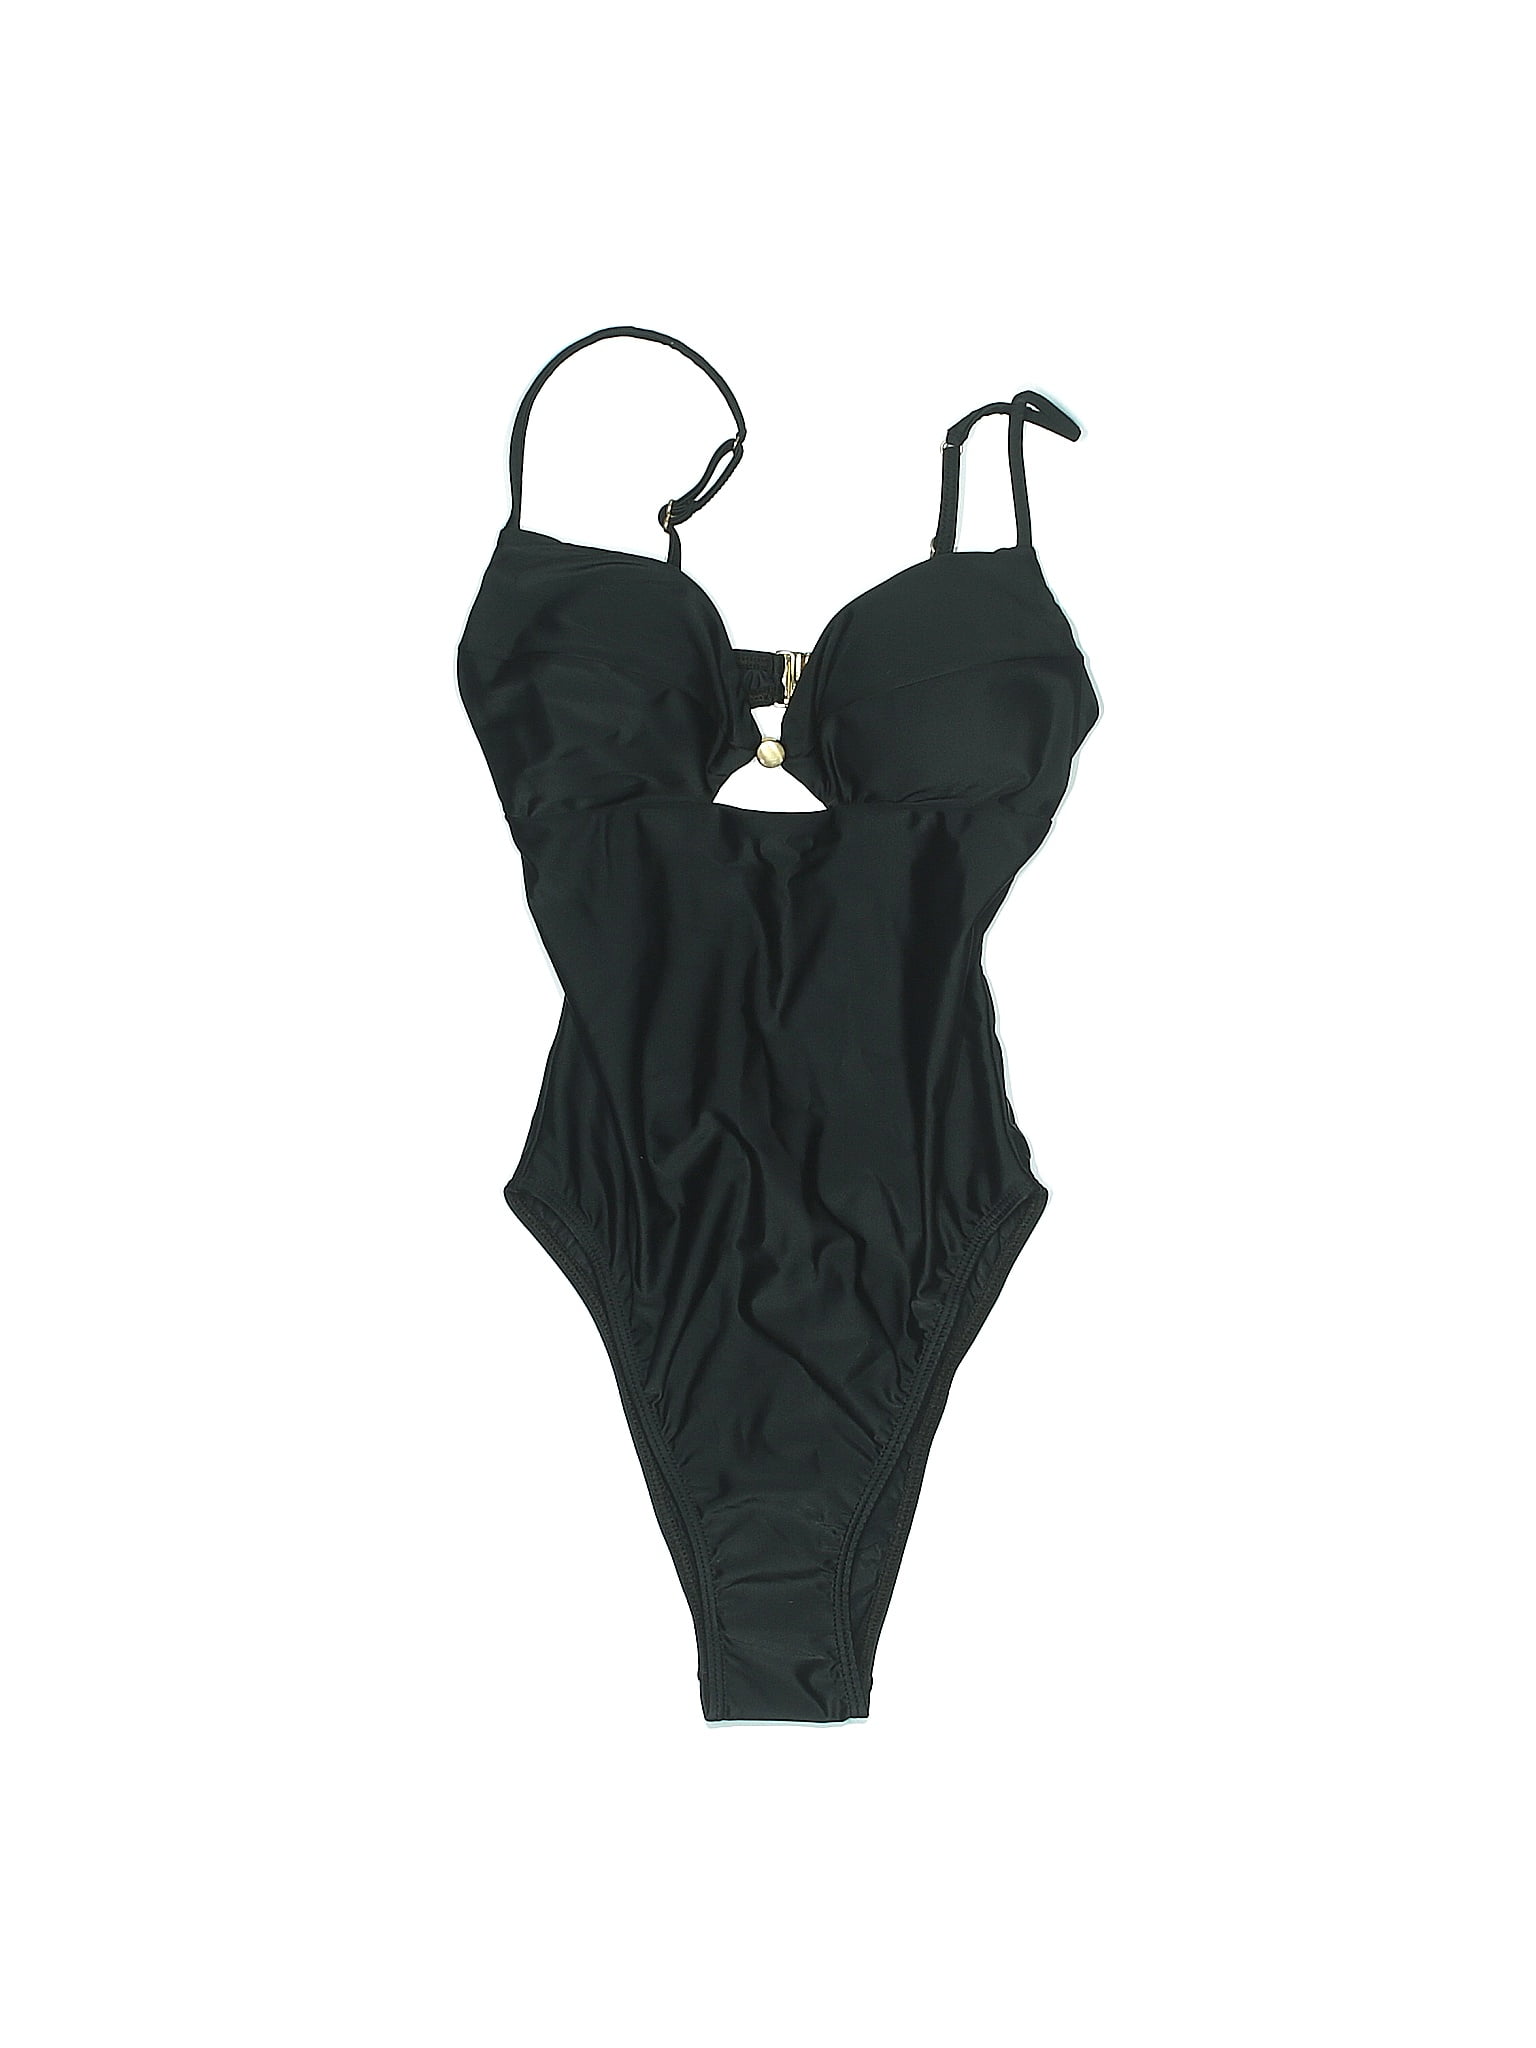 Vix by Paula Hermanny Solid Black One Piece Swimsuit Size S - 72% off ...